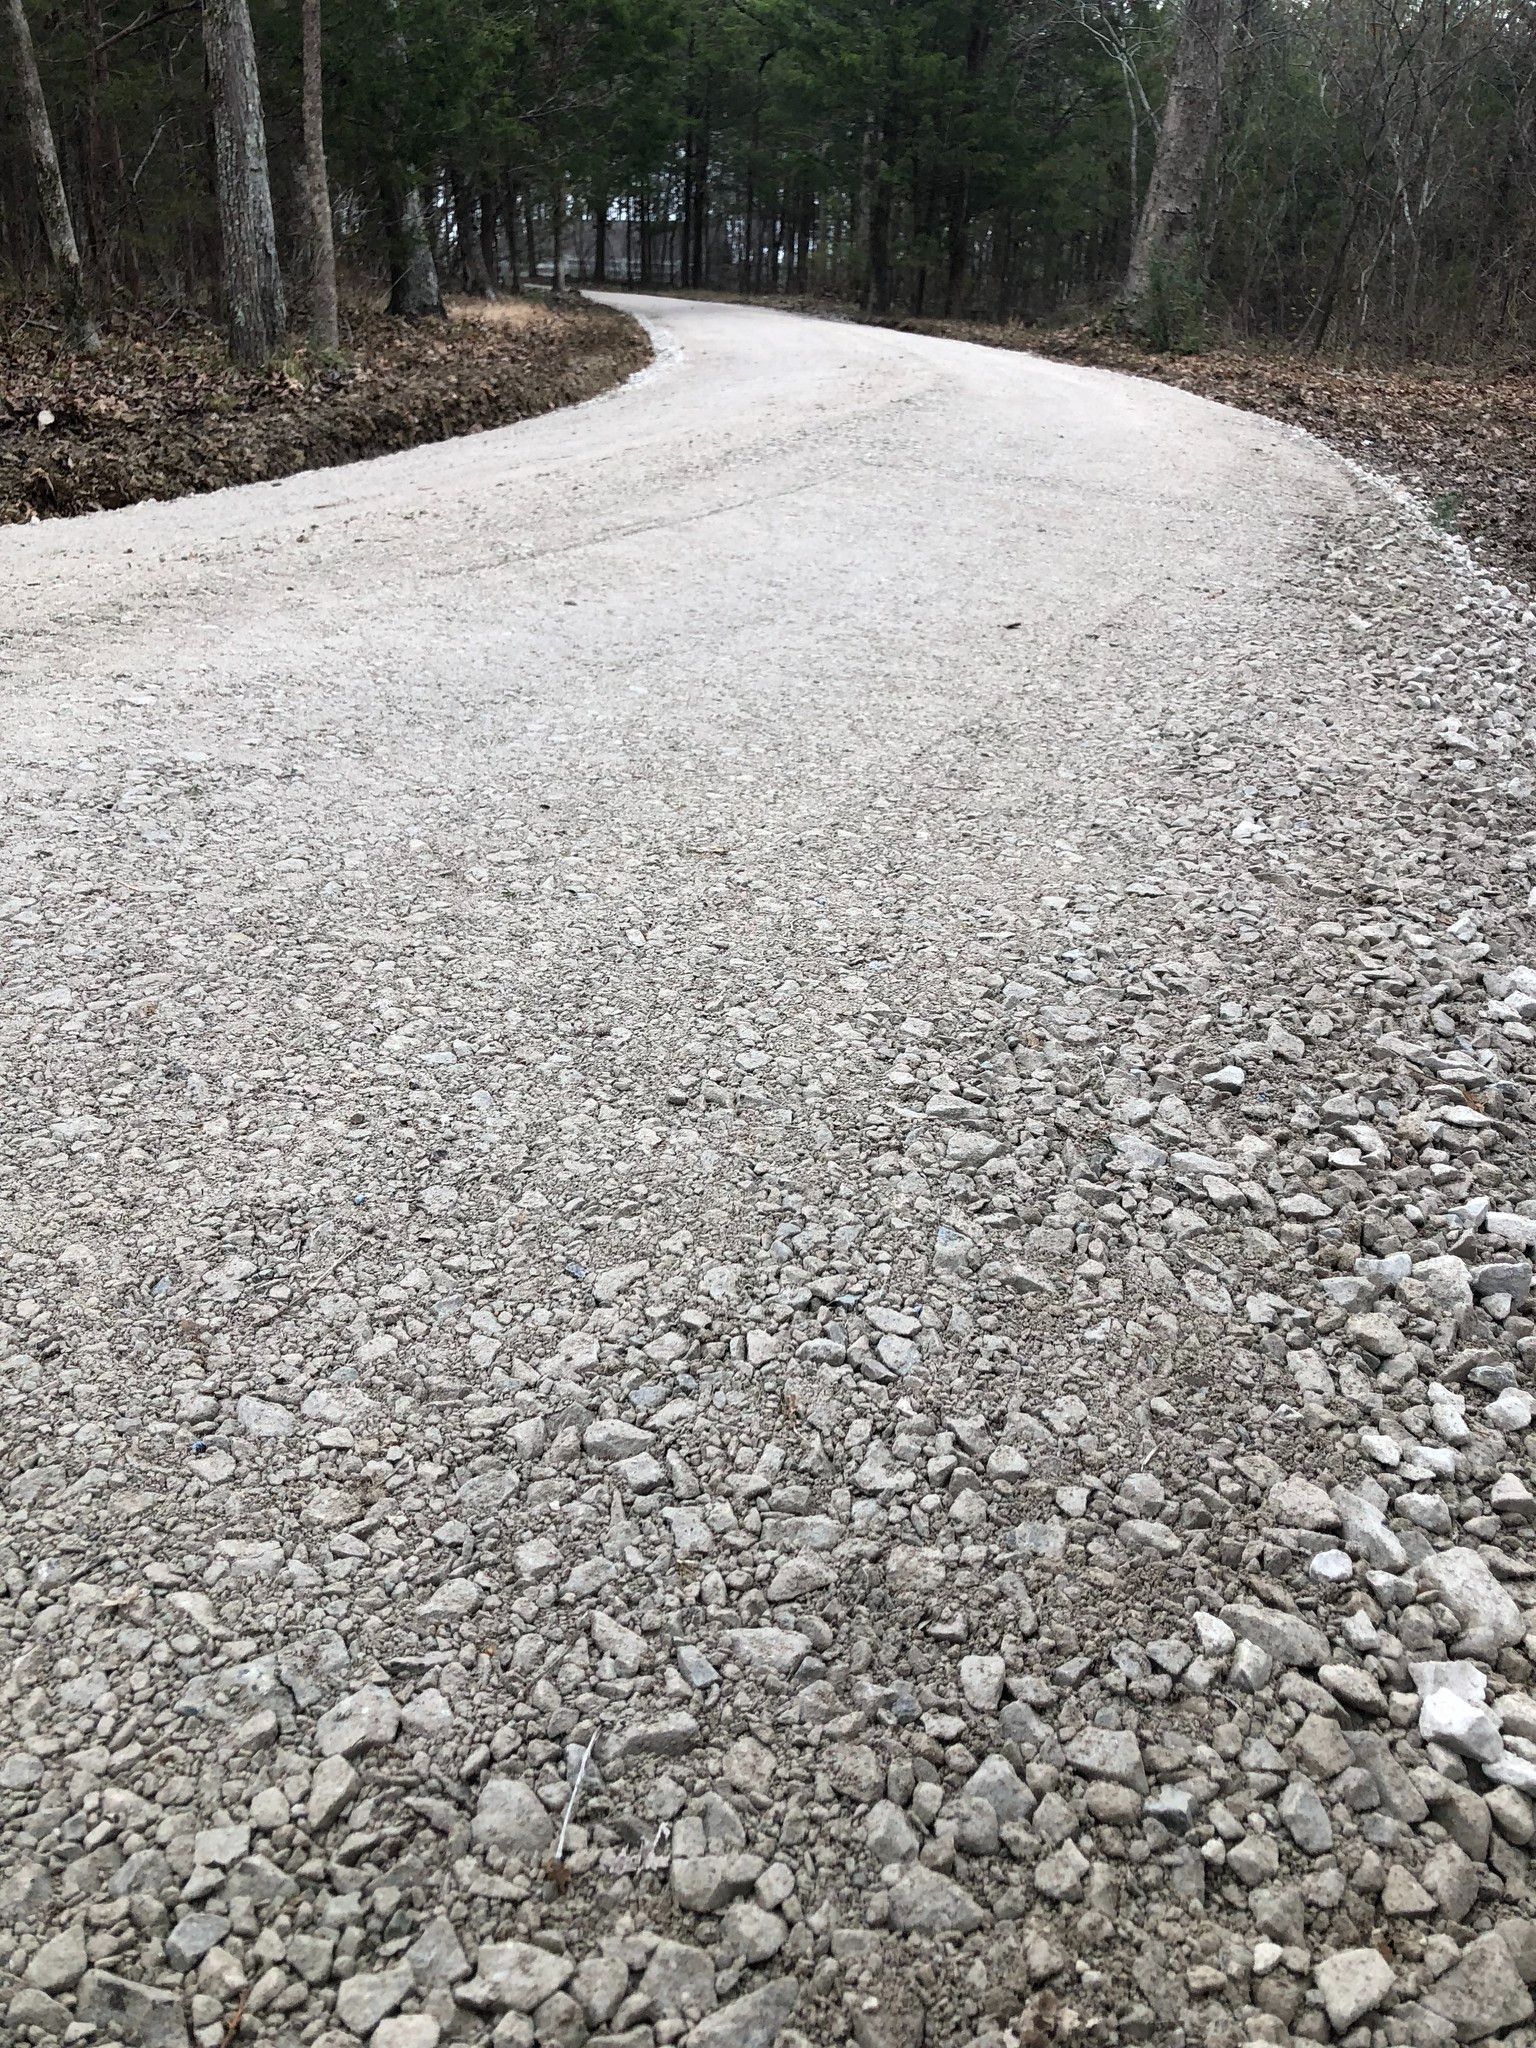 A gravel road going through a forest with trees on both sides.